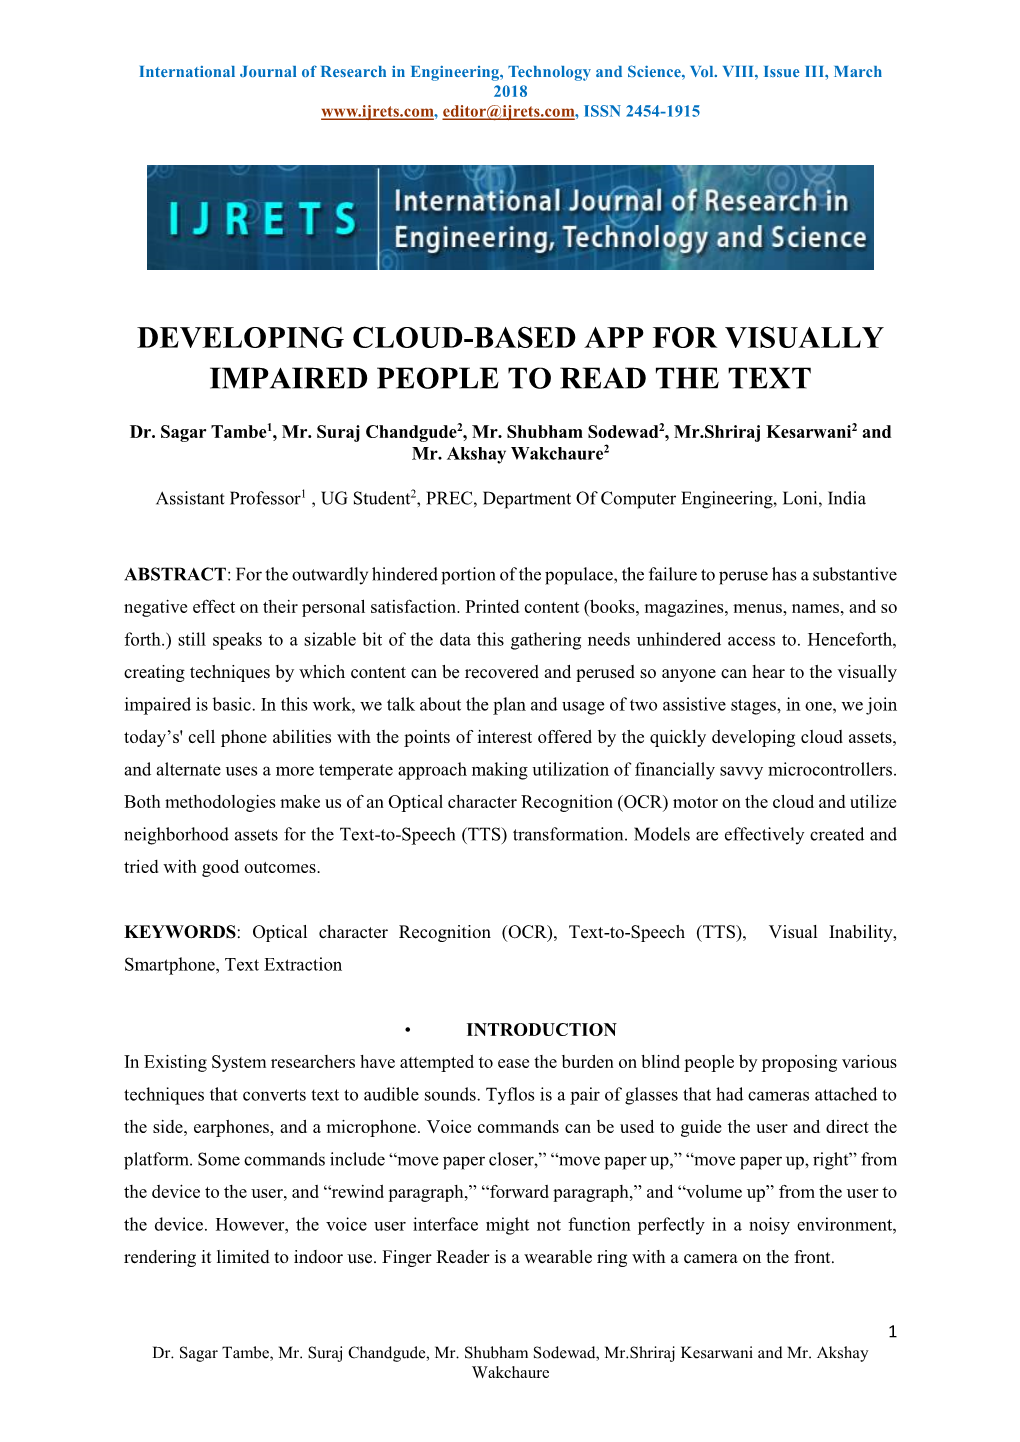 Developing Cloud-Based App for Visually Impaired People to Read the Text